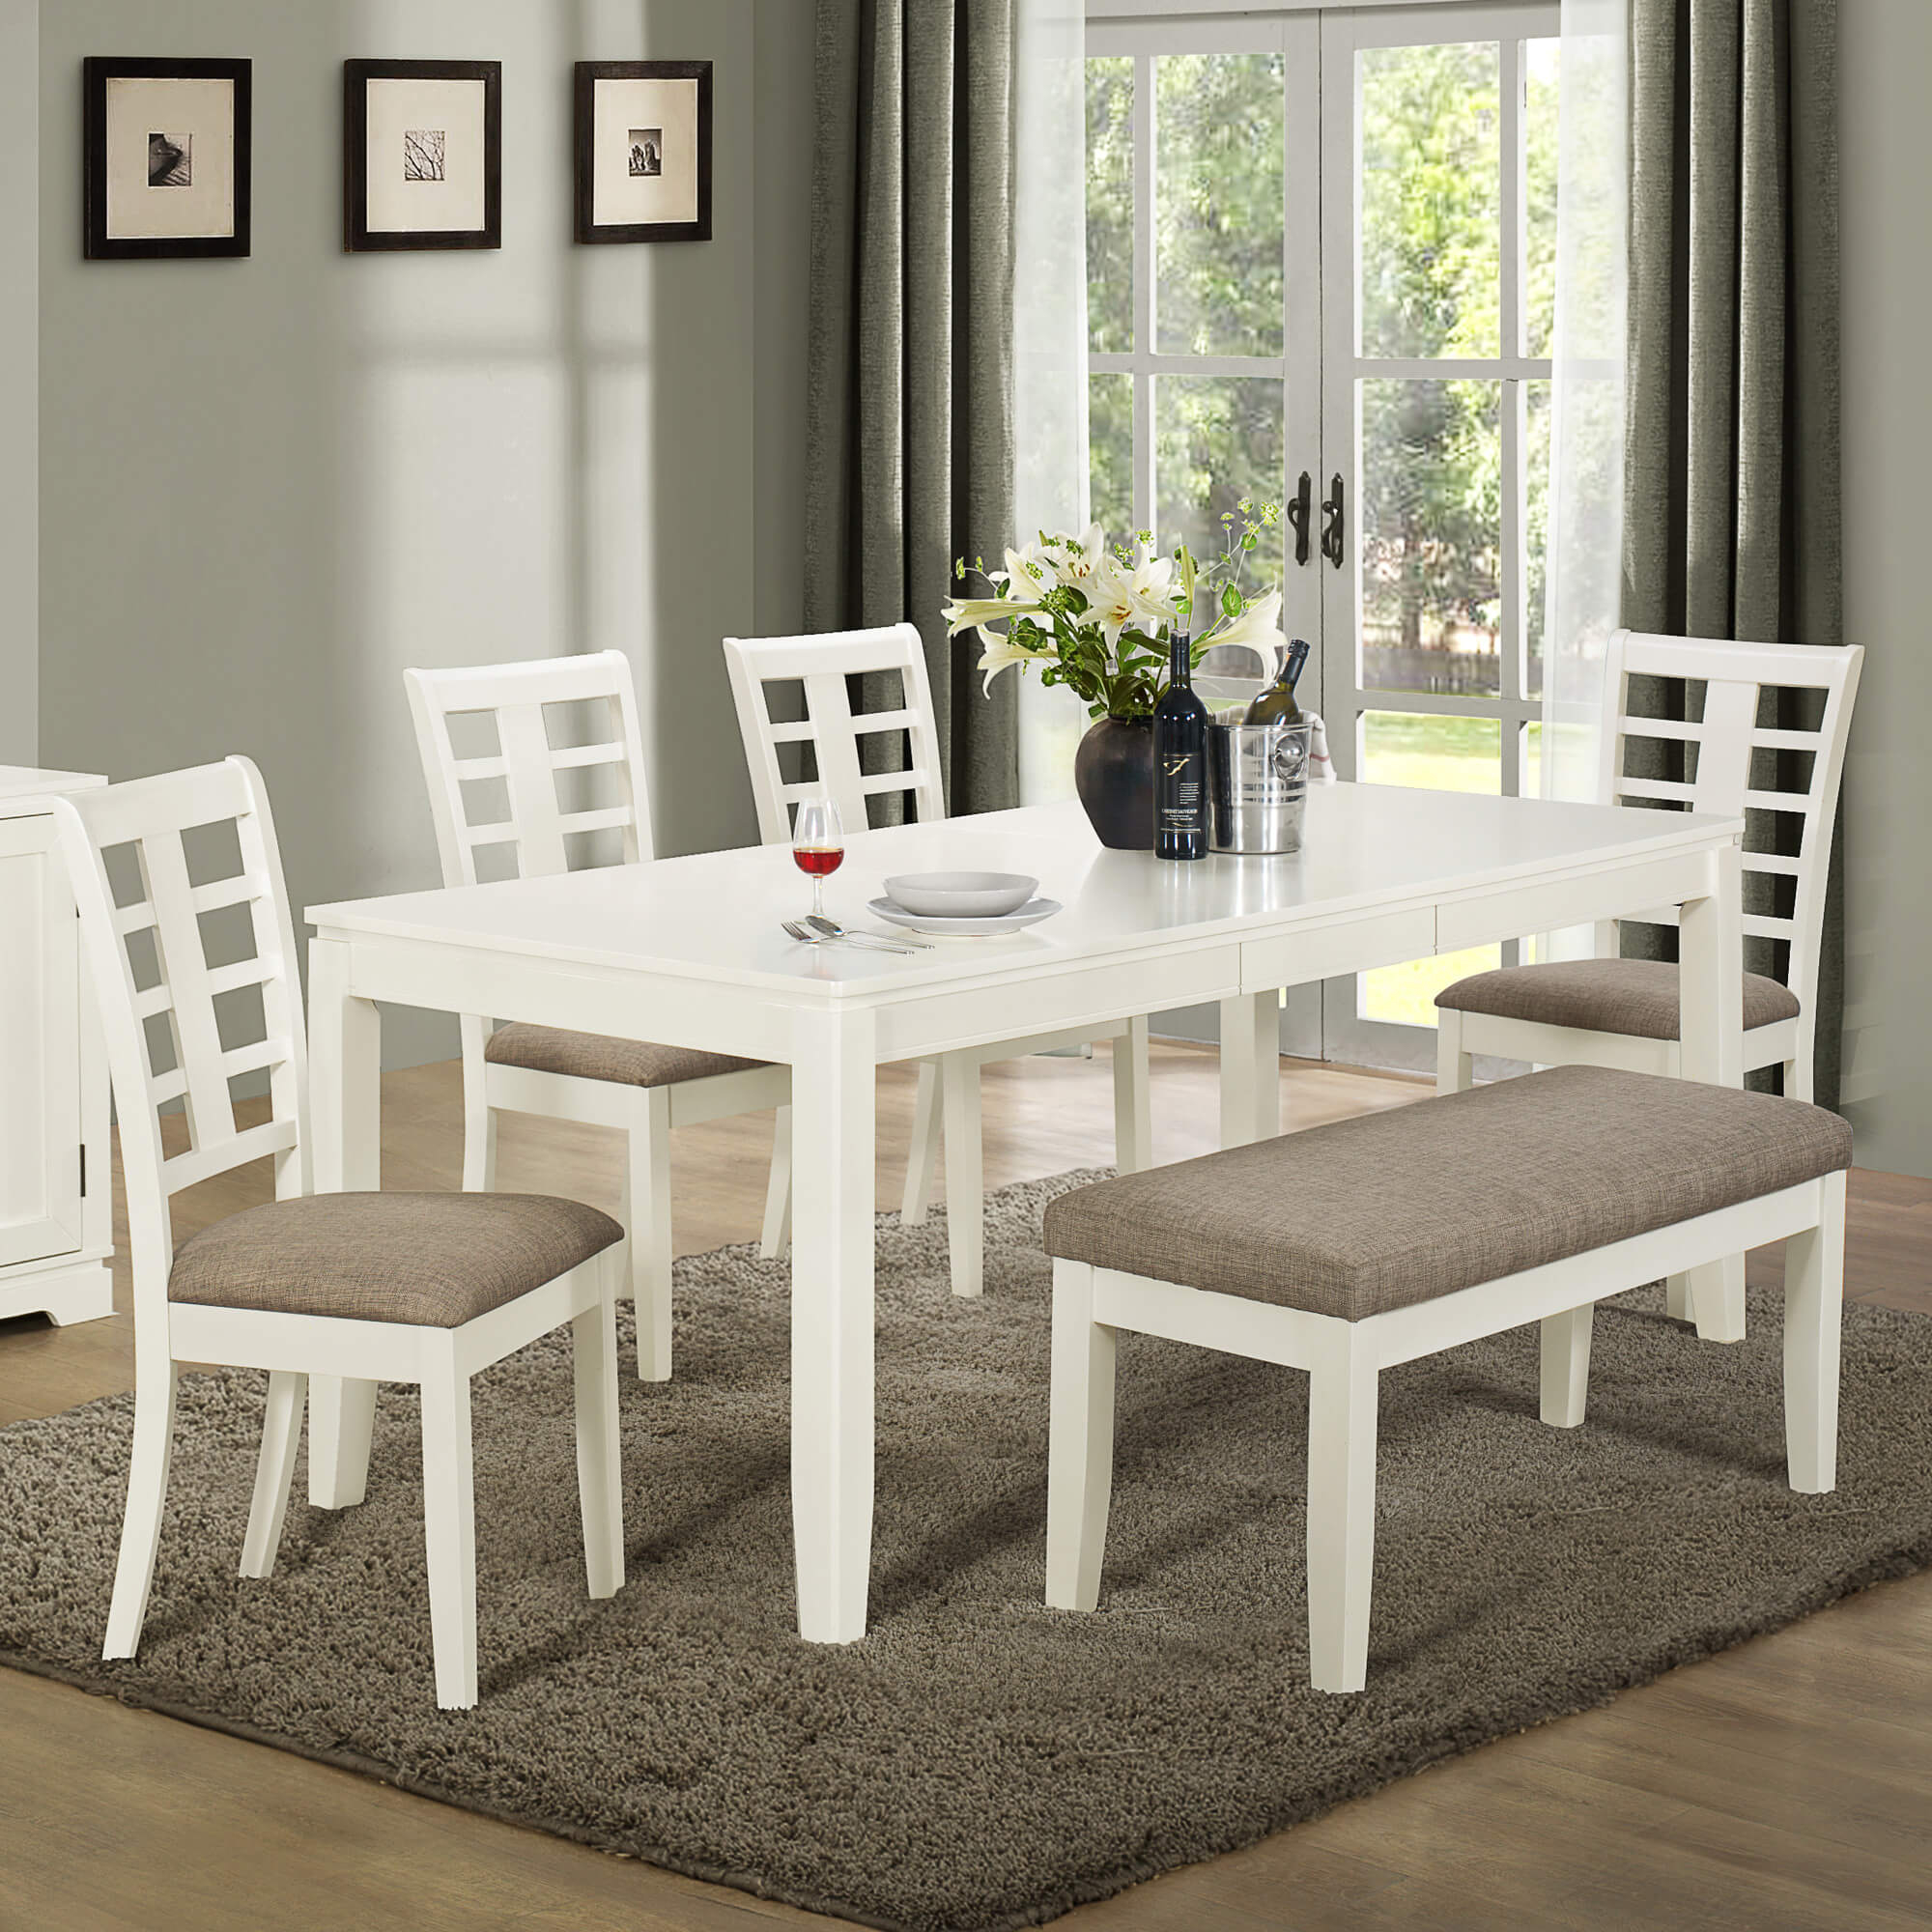 26 Dining Room Sets Big And Small With Bench Seating 2020 throughout proportions 2000 X 2000